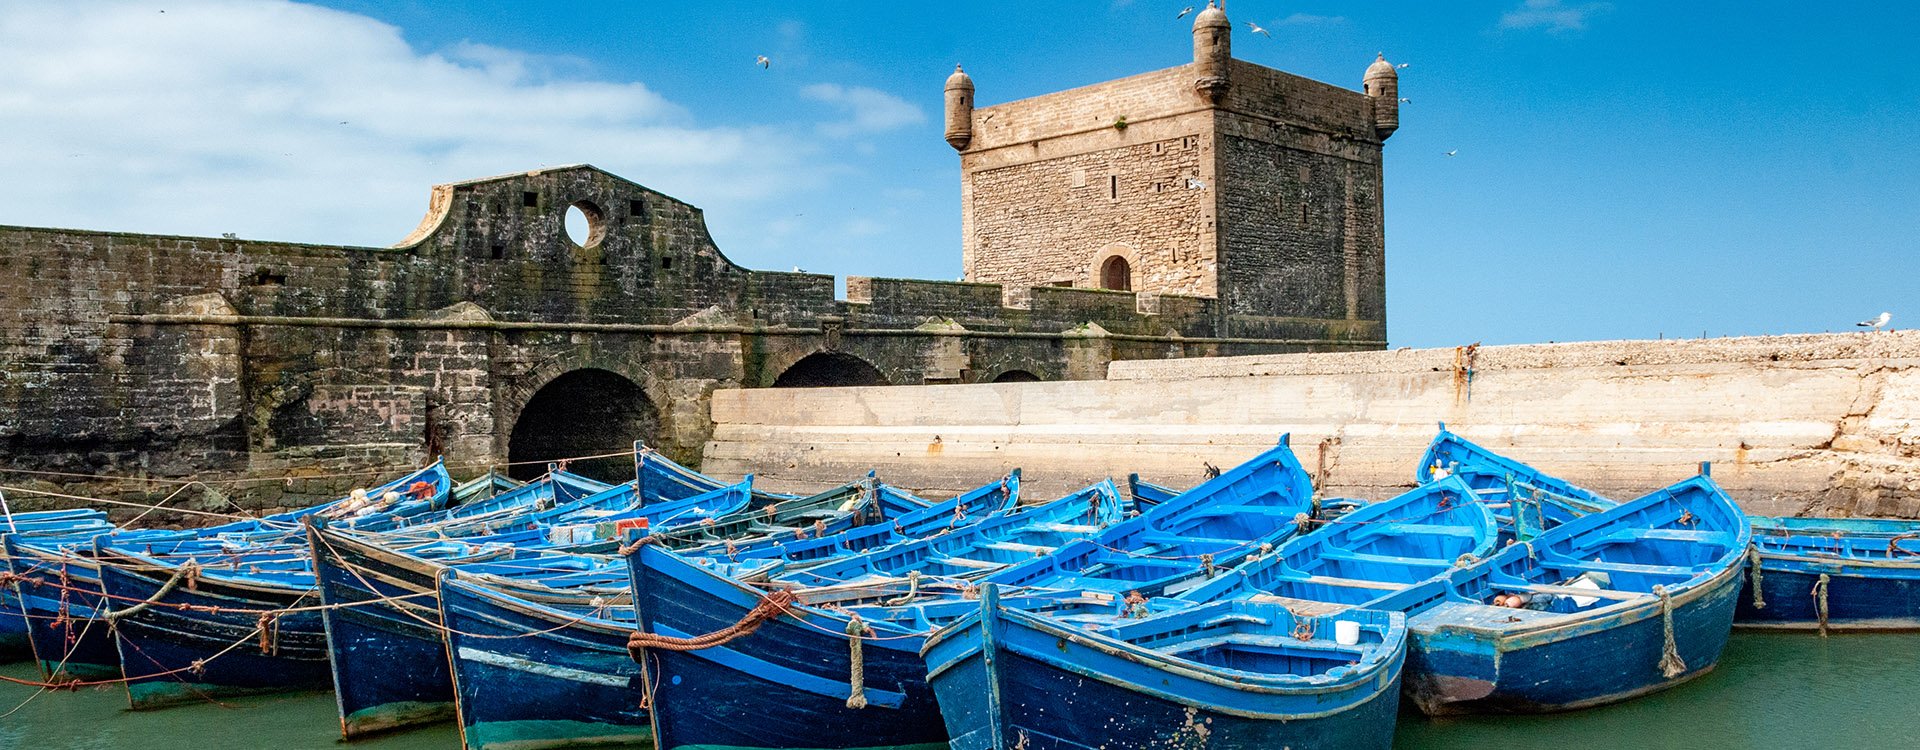 A fleet of blue fishing boats in the port of Essaouira in Morocco. Tower of the citadel of Mogador